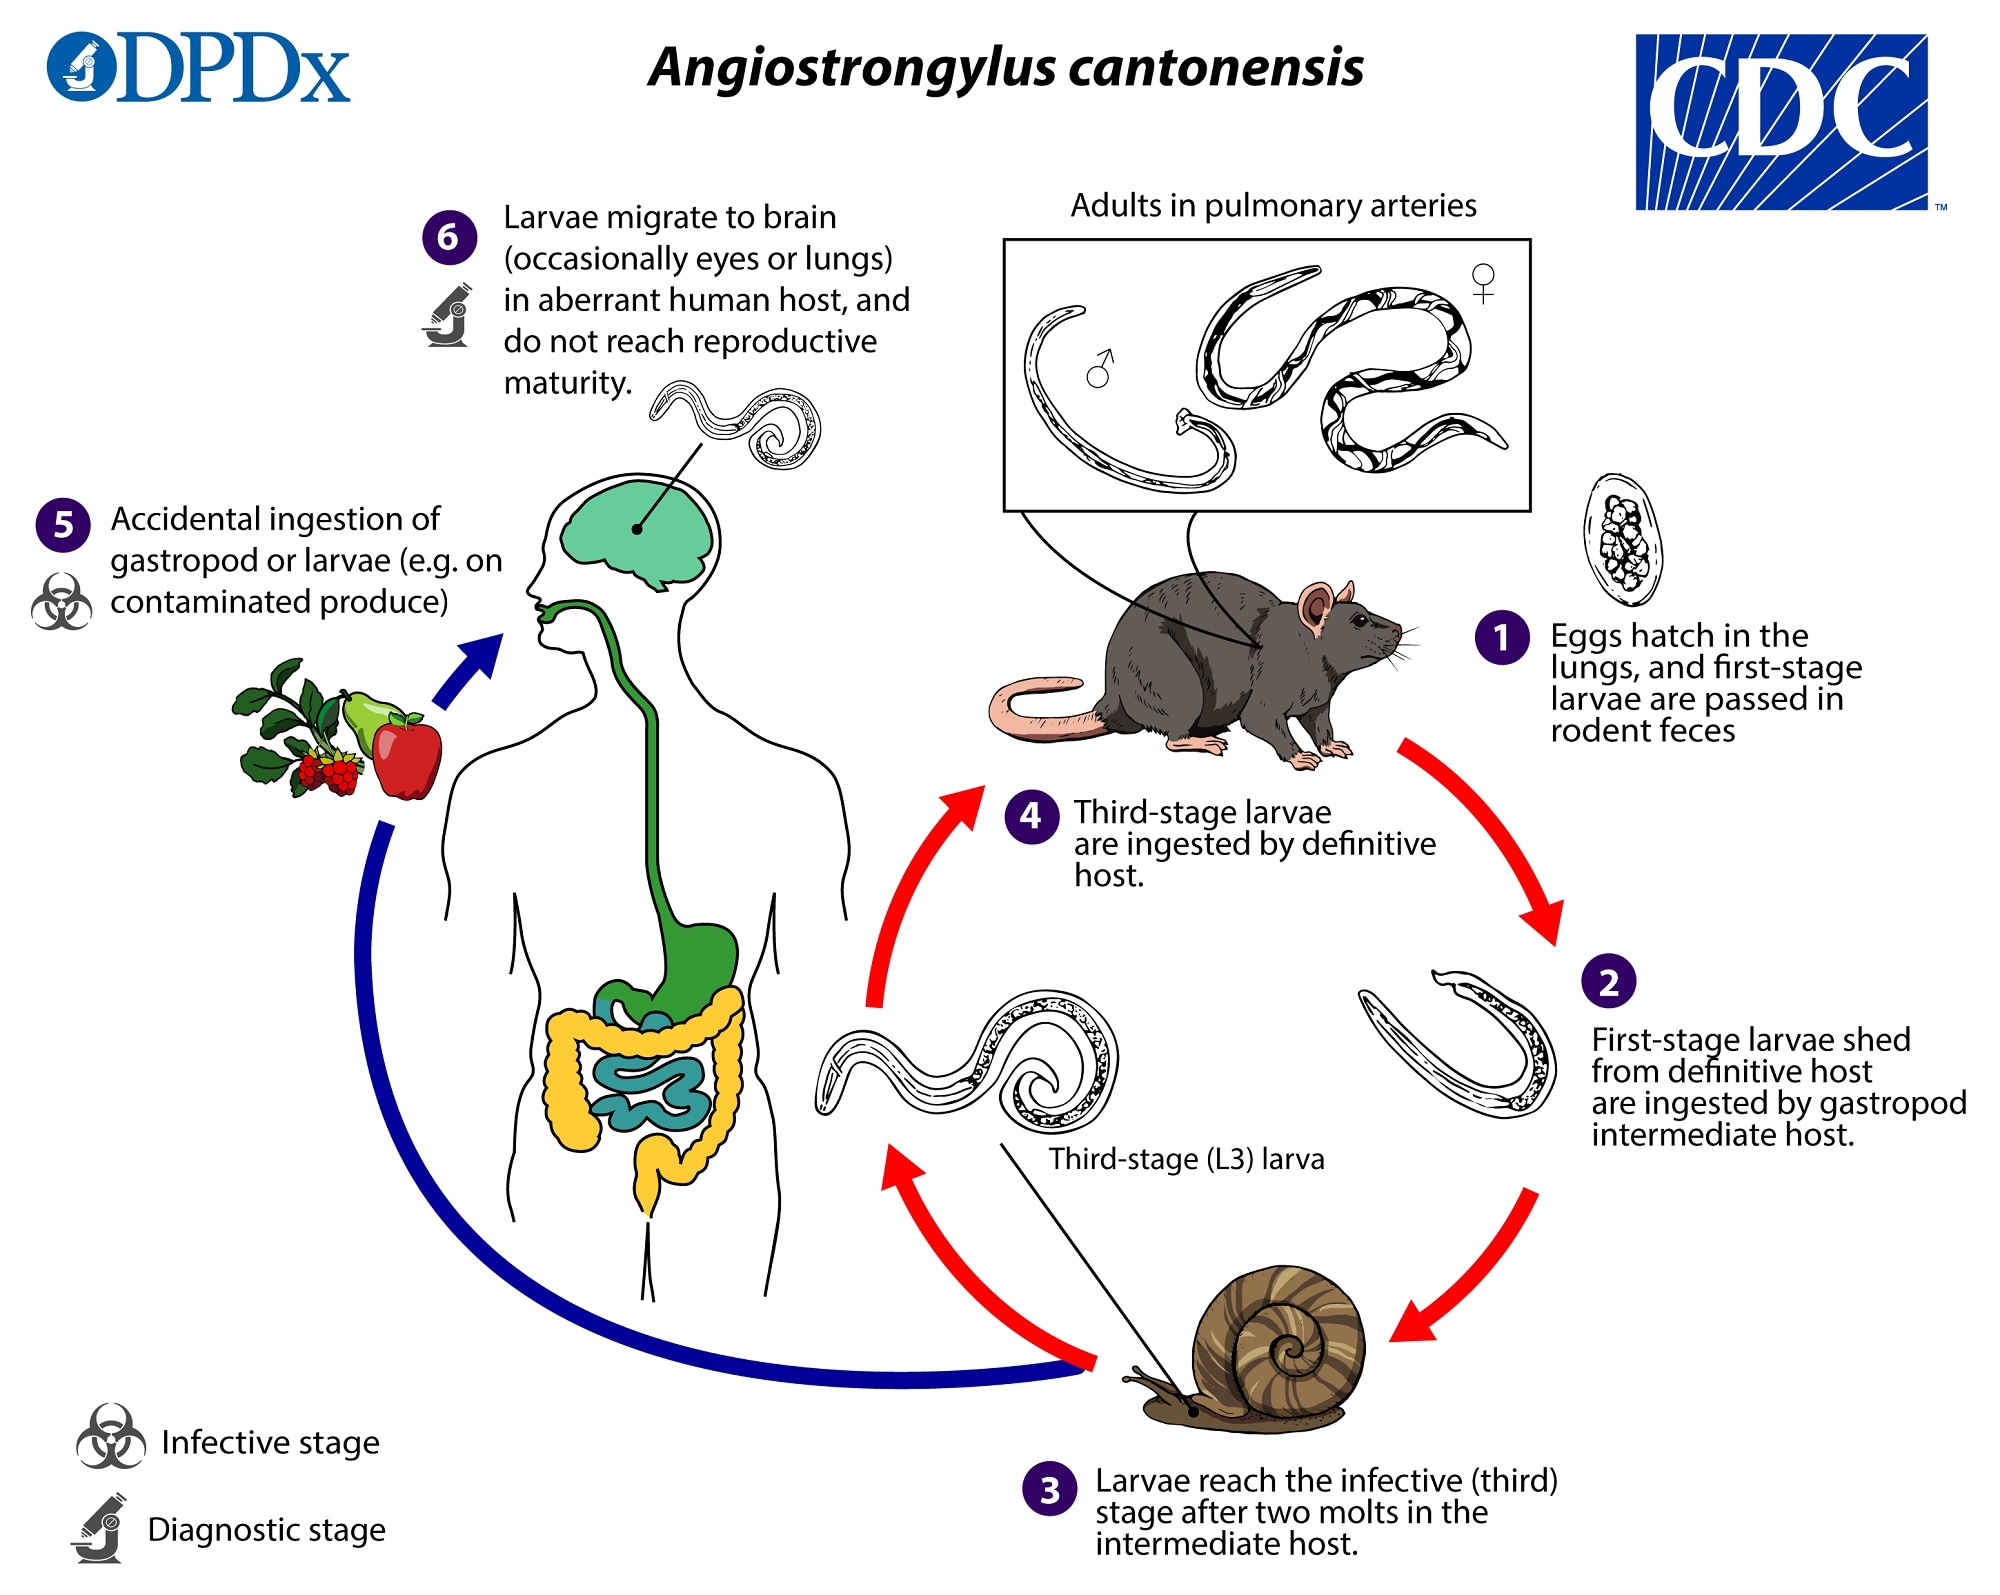 https://www.cdc.gov/dpdx/angiostrongyliasis_can/modules/Angio_cant_LifeCycle_lg.jpg